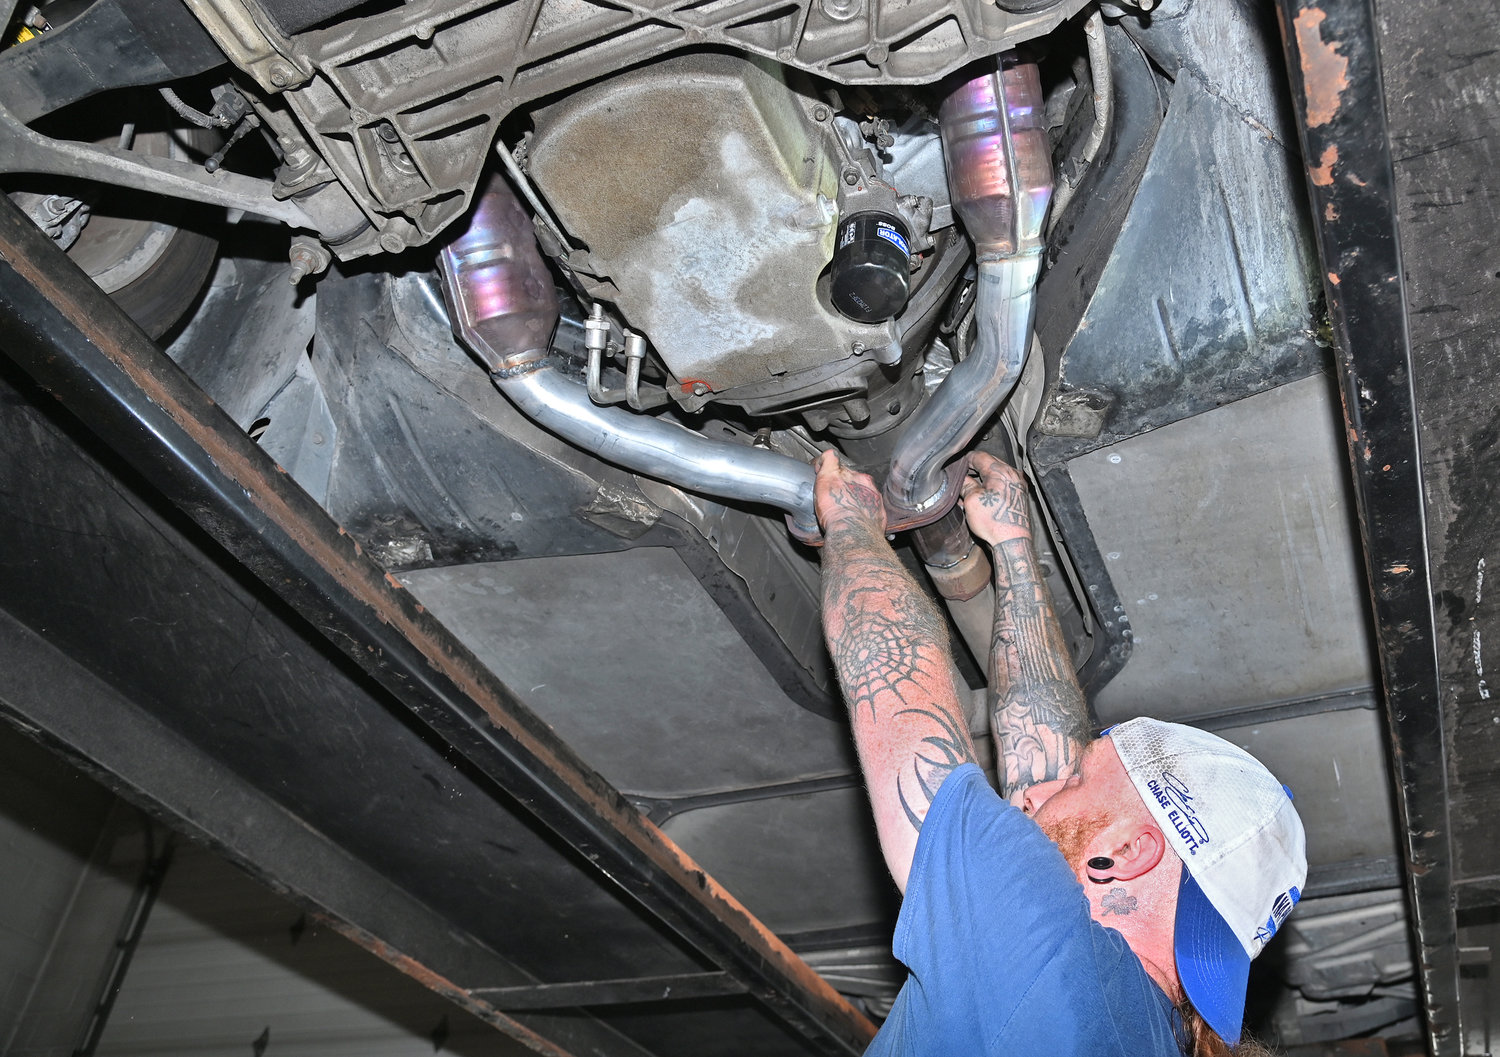 Premo Automotive mechanic Justin Sykes secures the exhaust beyond the catalytic converters that have the bronzish sheen to them. Premo’s had just installed a new exhaust system including two new catalytic converters. Premo Automotive is at 176 Black River Blvd N., Rome.